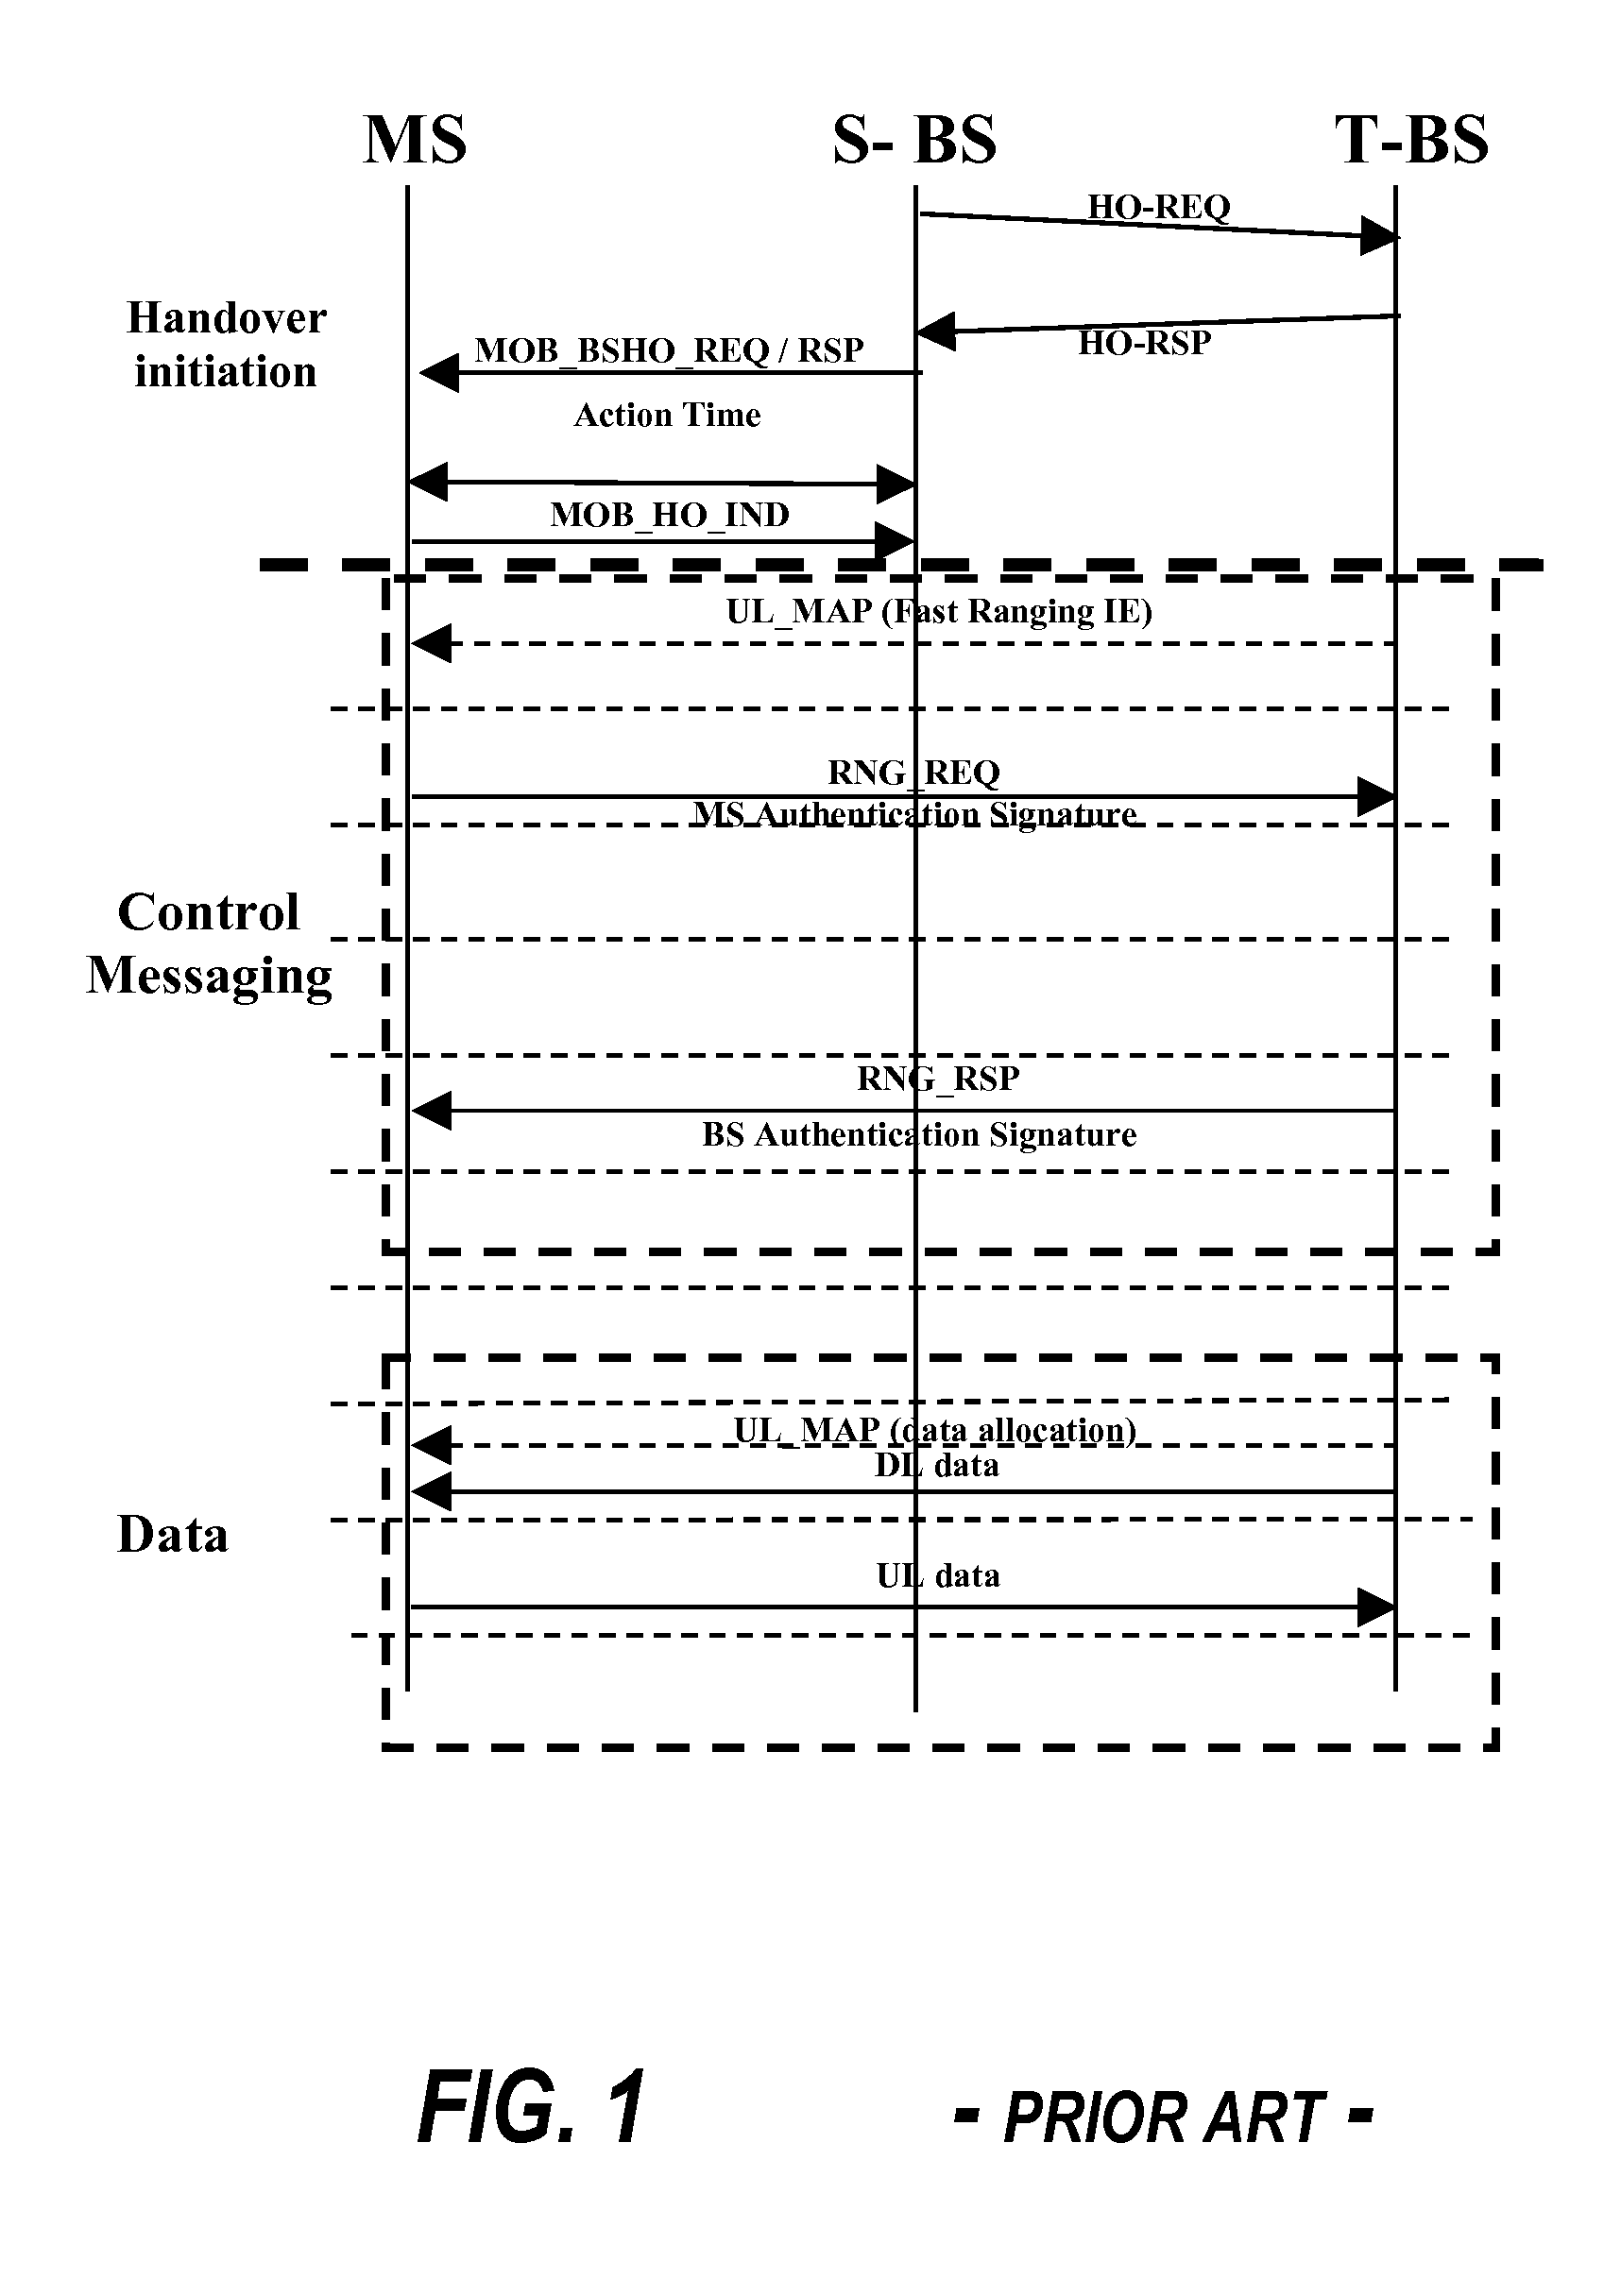 Authentication while exchanging data in a communication system